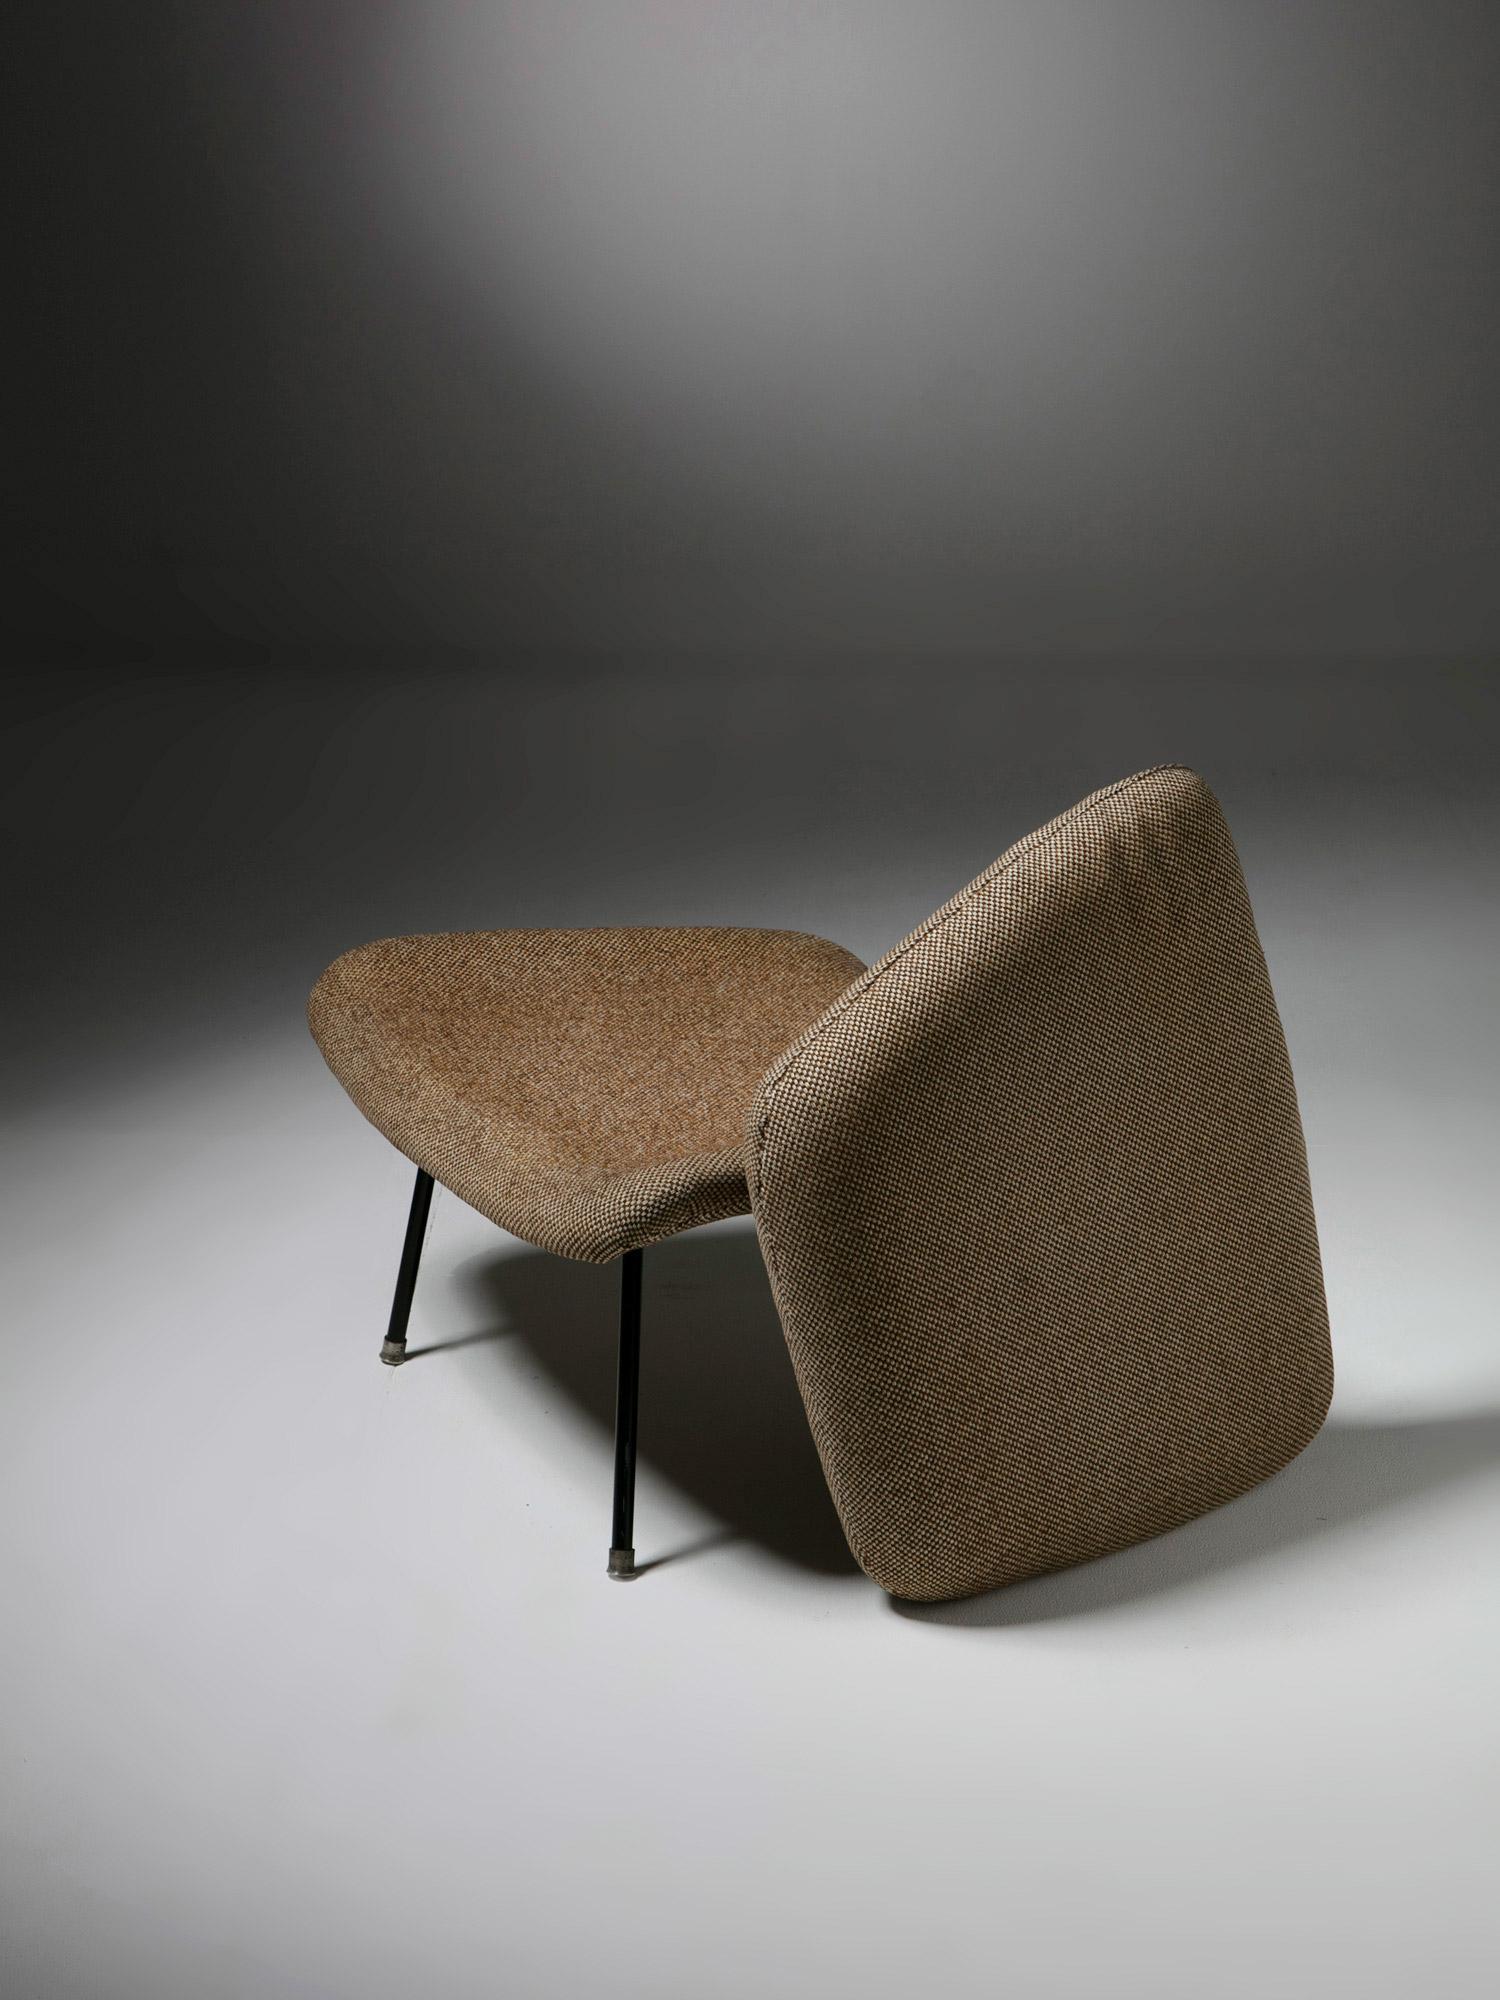 Ottoman by Eero Saarinen for Knoll
The piece is constructed of foam cushion over moulded plywood.
 